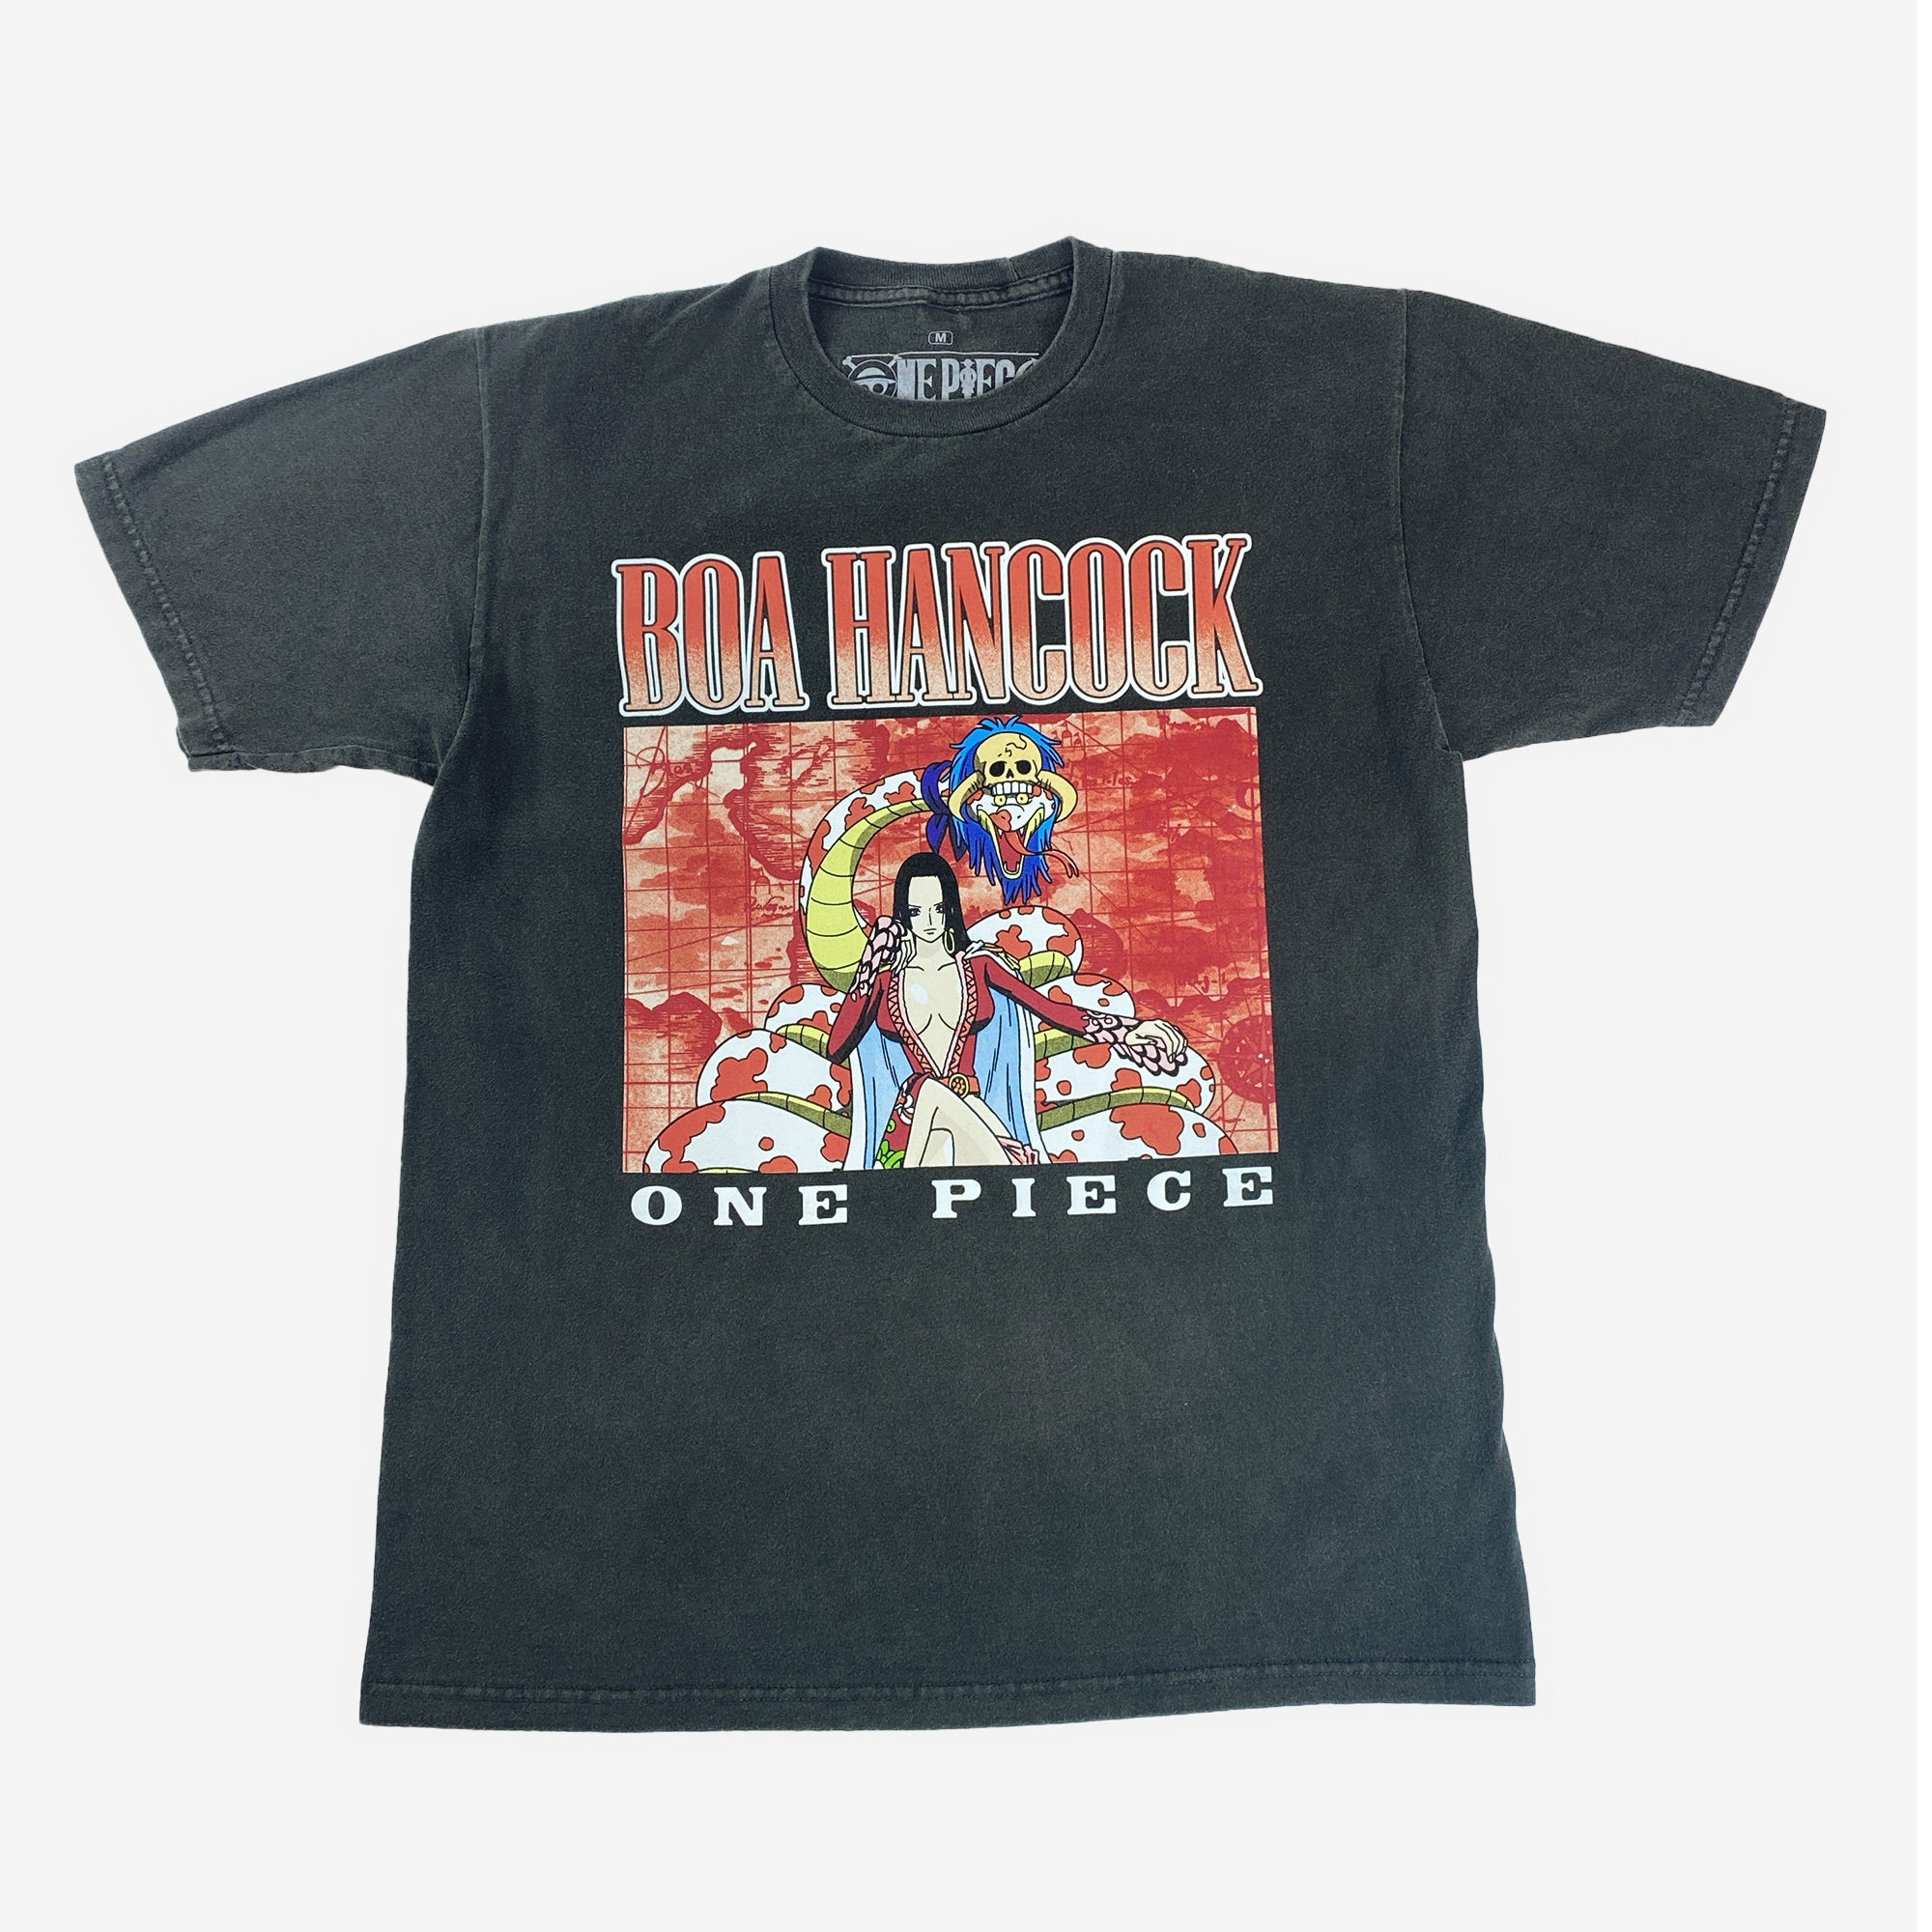 One Piece - Boa Hancock 90's T-Shirt - Crunchyroll Exclusive! image count 0